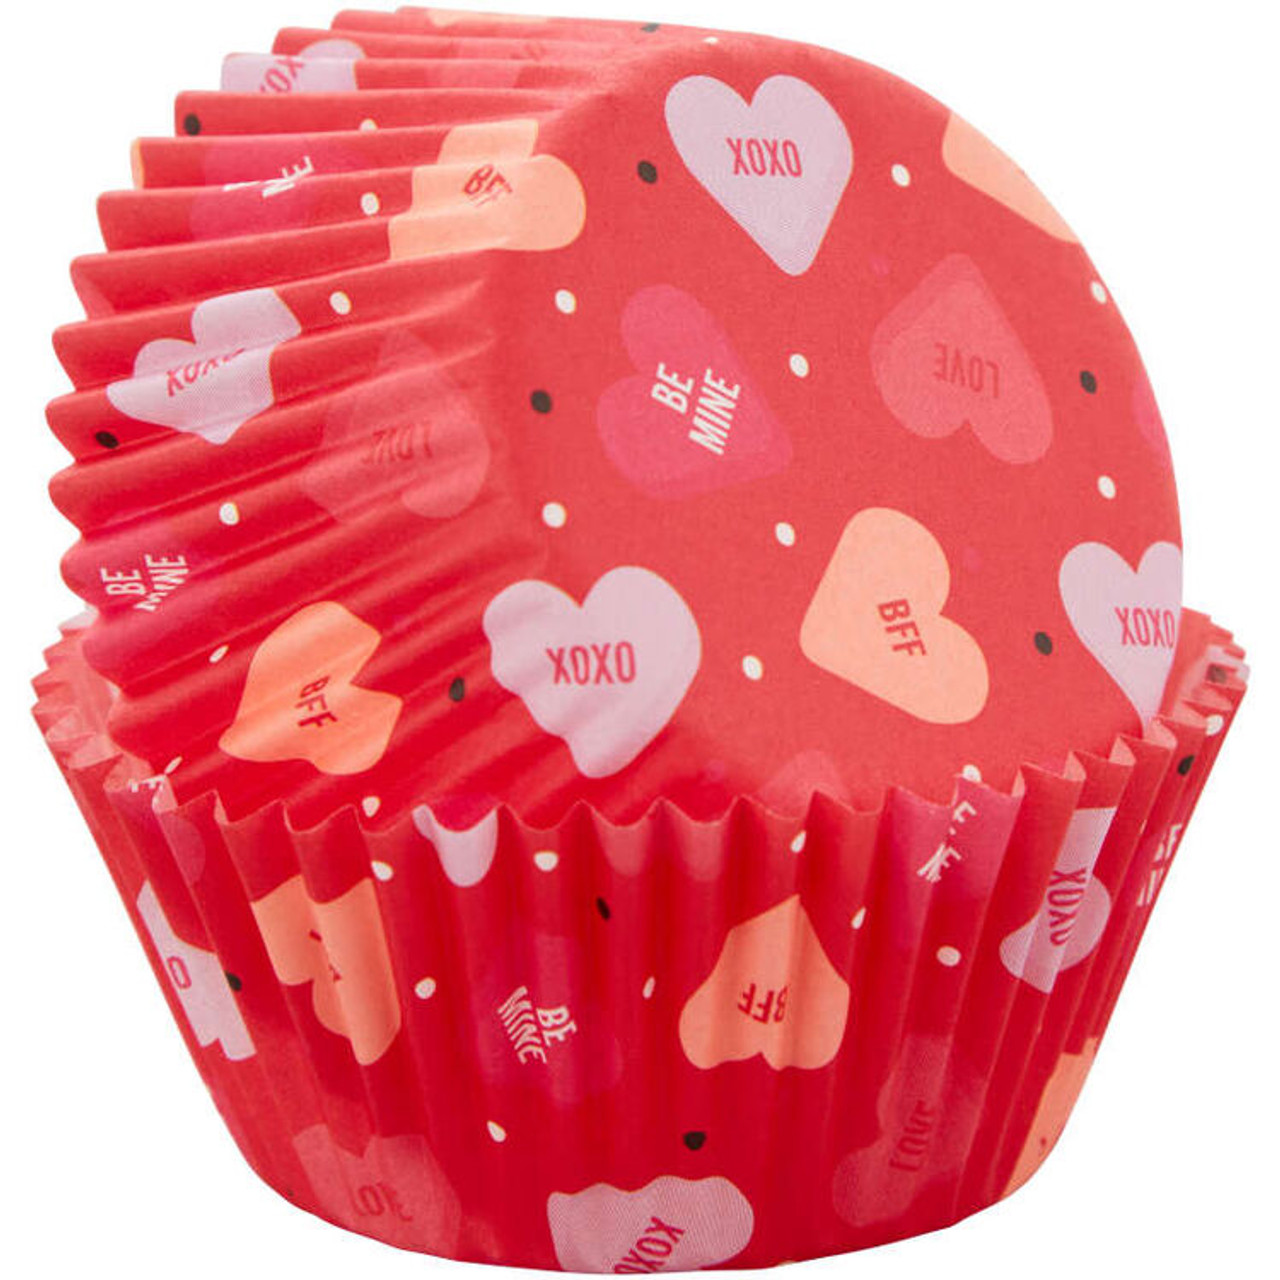 https://cdn11.bigcommerce.com/s-w8h1g5/images/stencil/1280x1280/products/12661/34044/415-0-0614-Wilton-Conversation-Hearts-Red-Valentines-Day-Cupcake-Liners-75-Count-A1__60992.1640560561.jpg?c=2